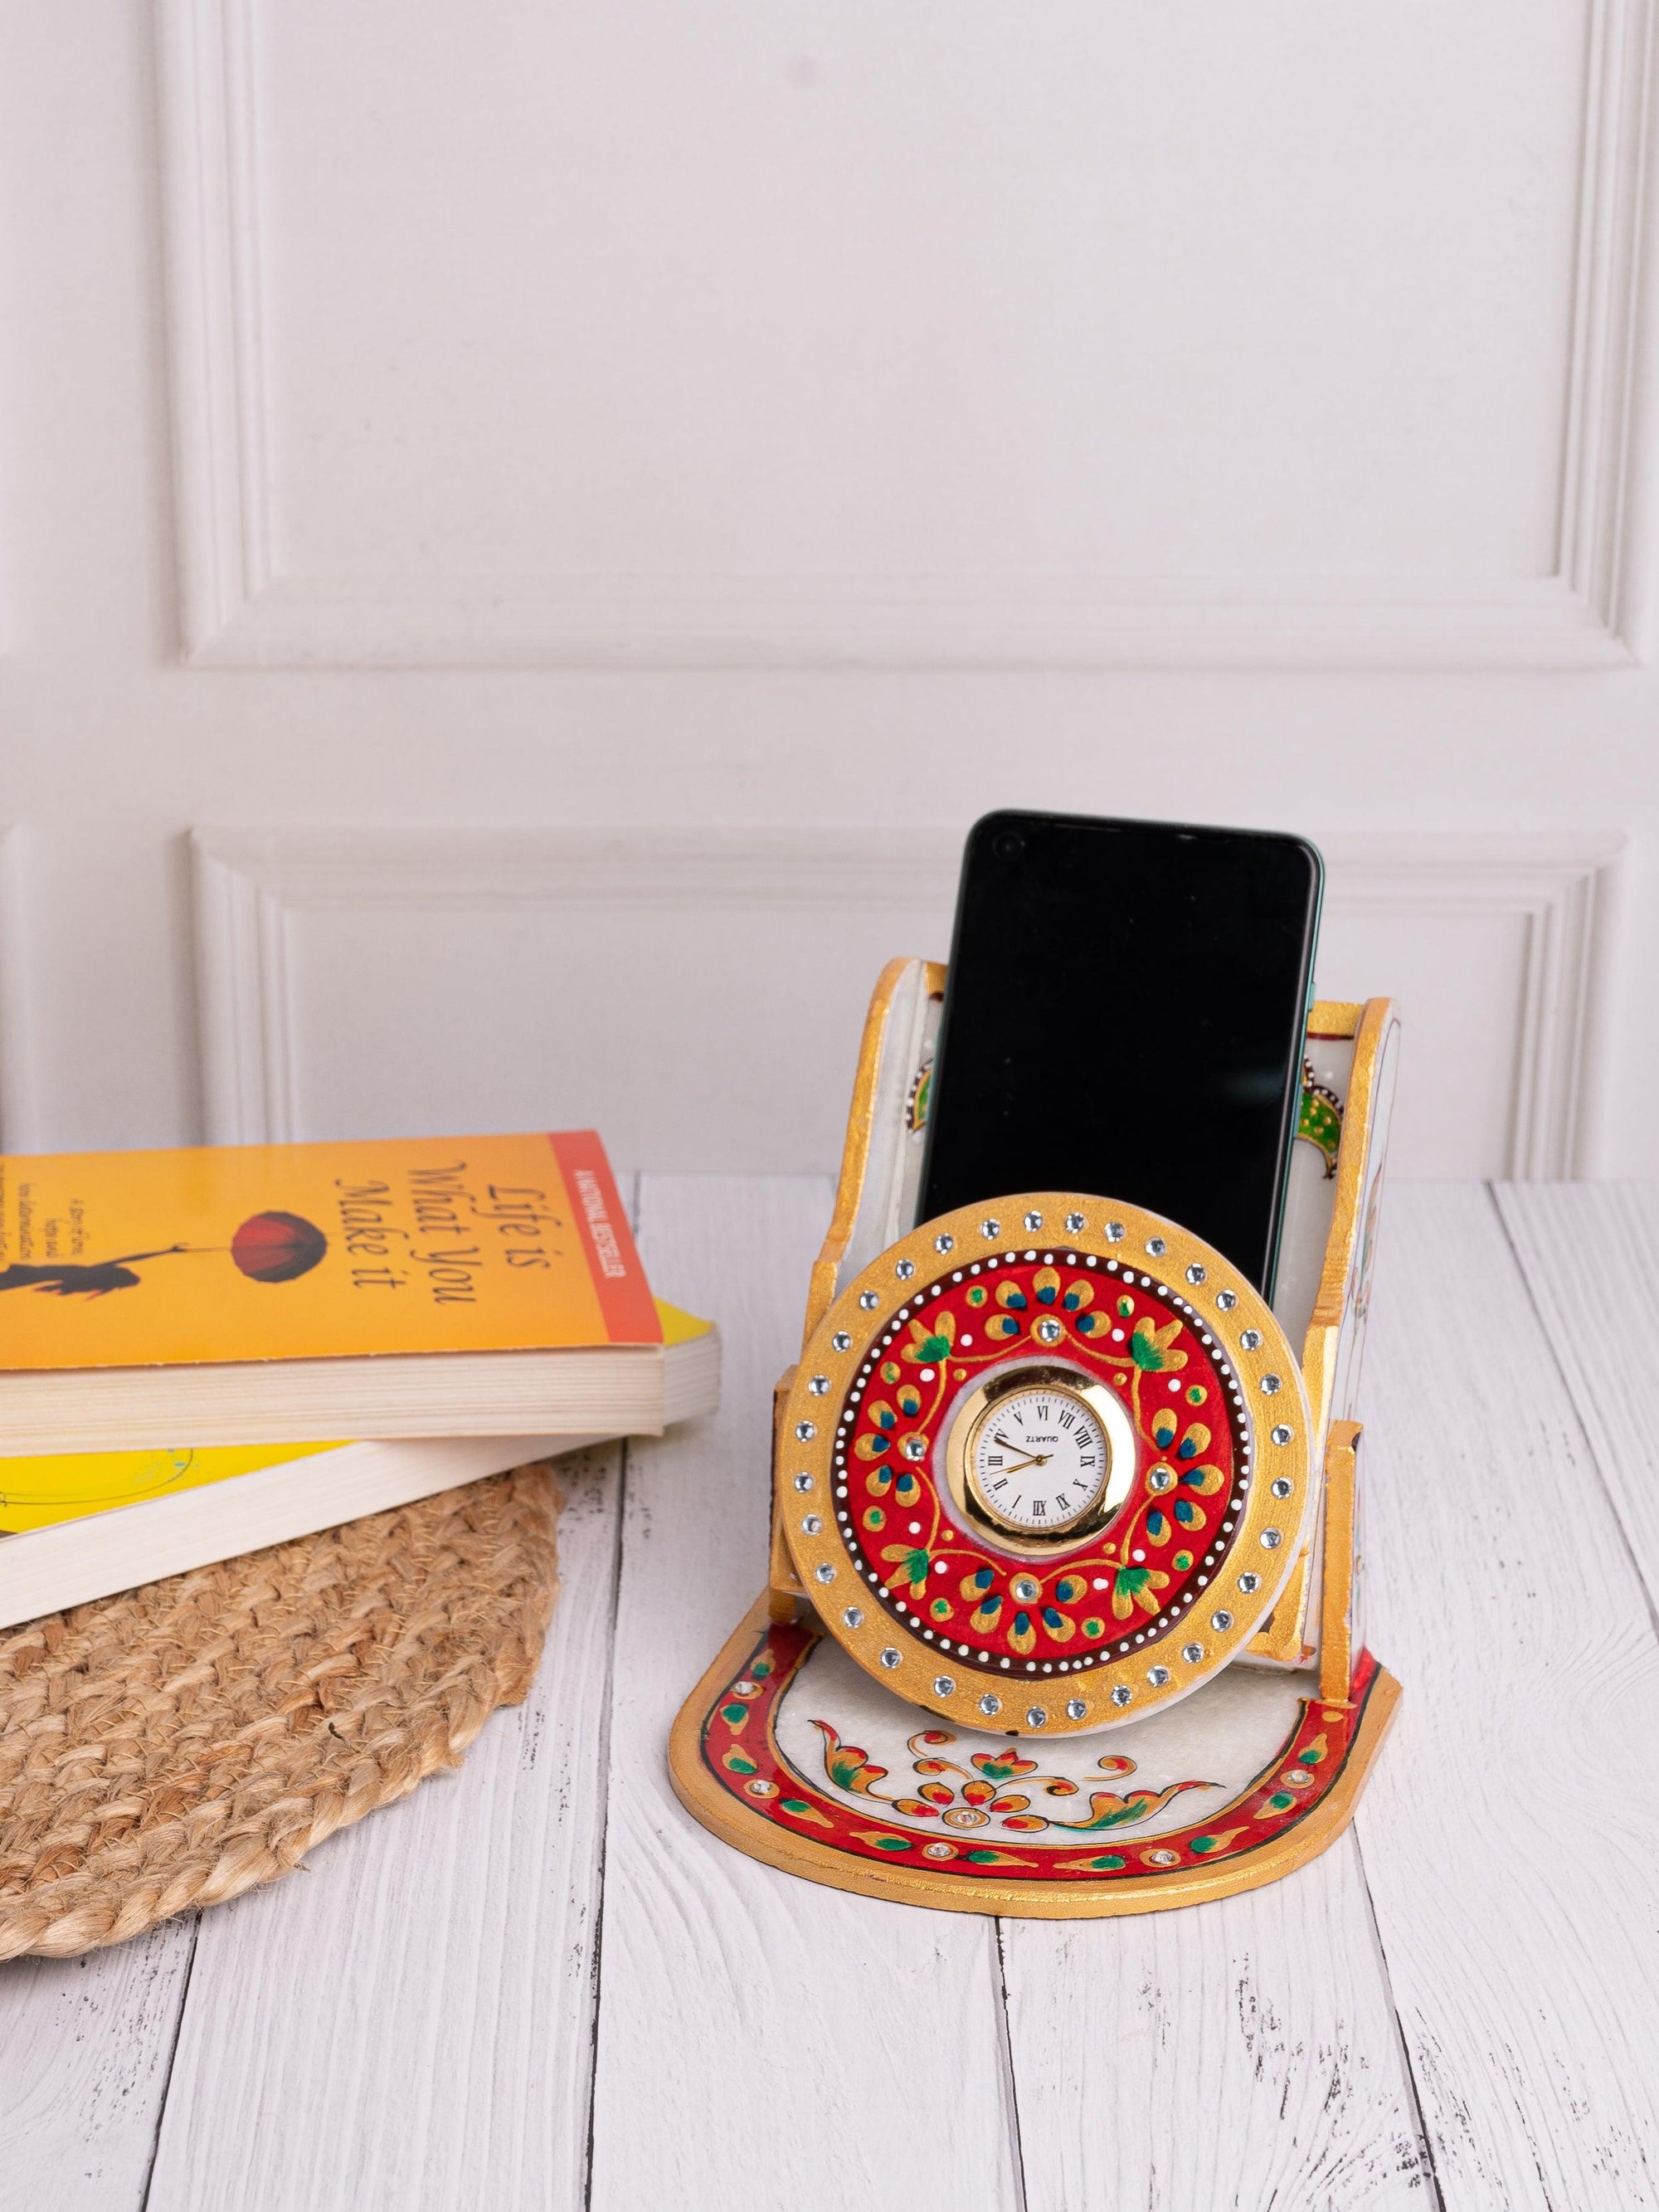 Marble mobile holder with clock - Red and Gold motifs - The Heritage Artifacts